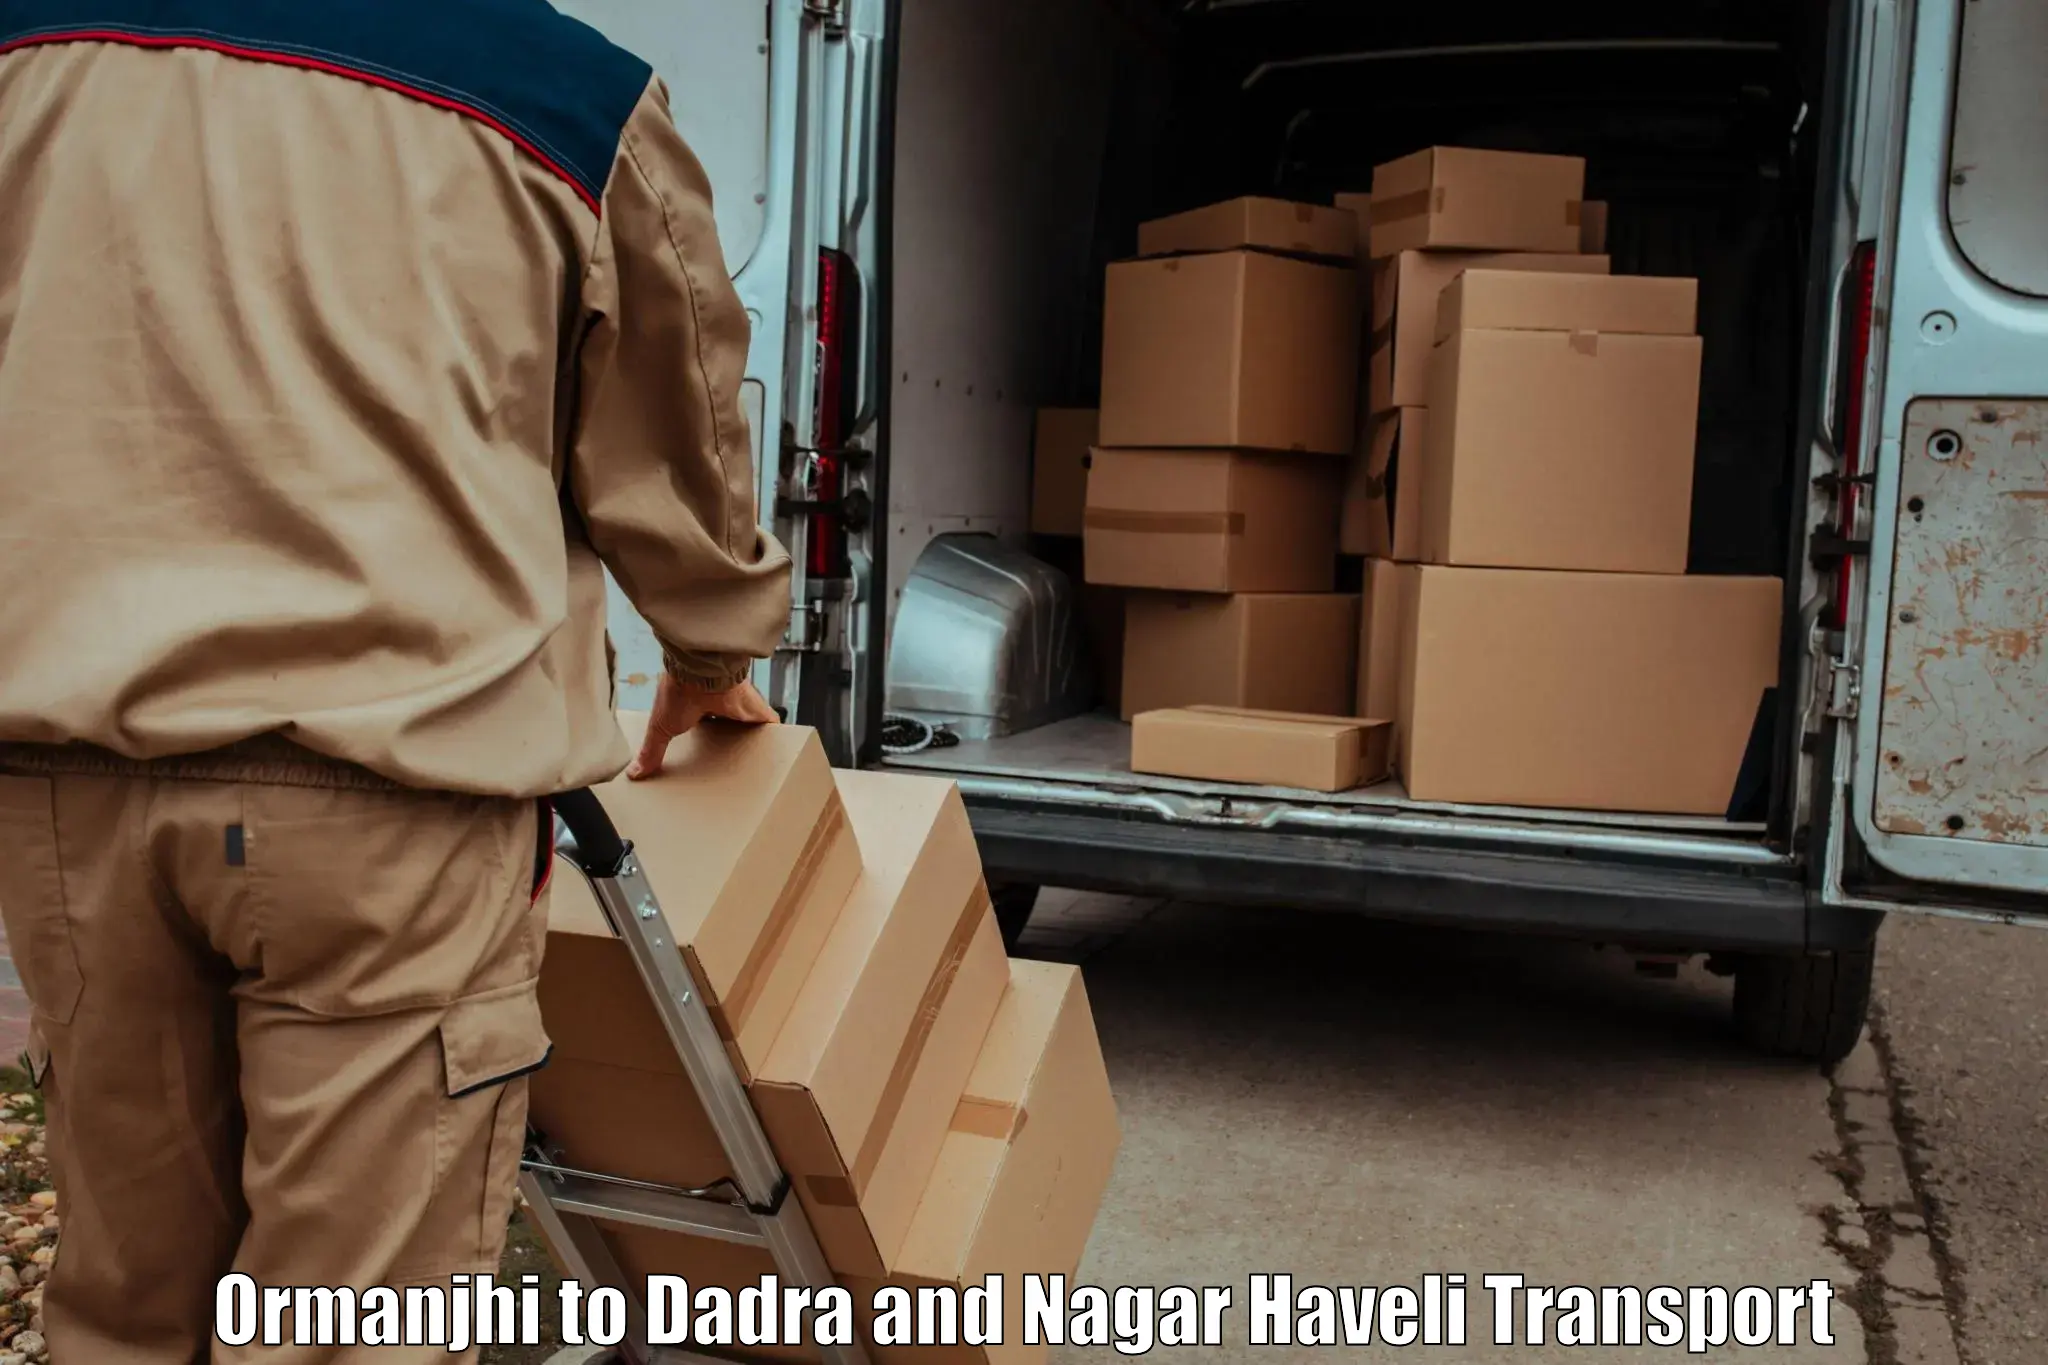 Commercial transport service in Ormanjhi to Dadra and Nagar Haveli